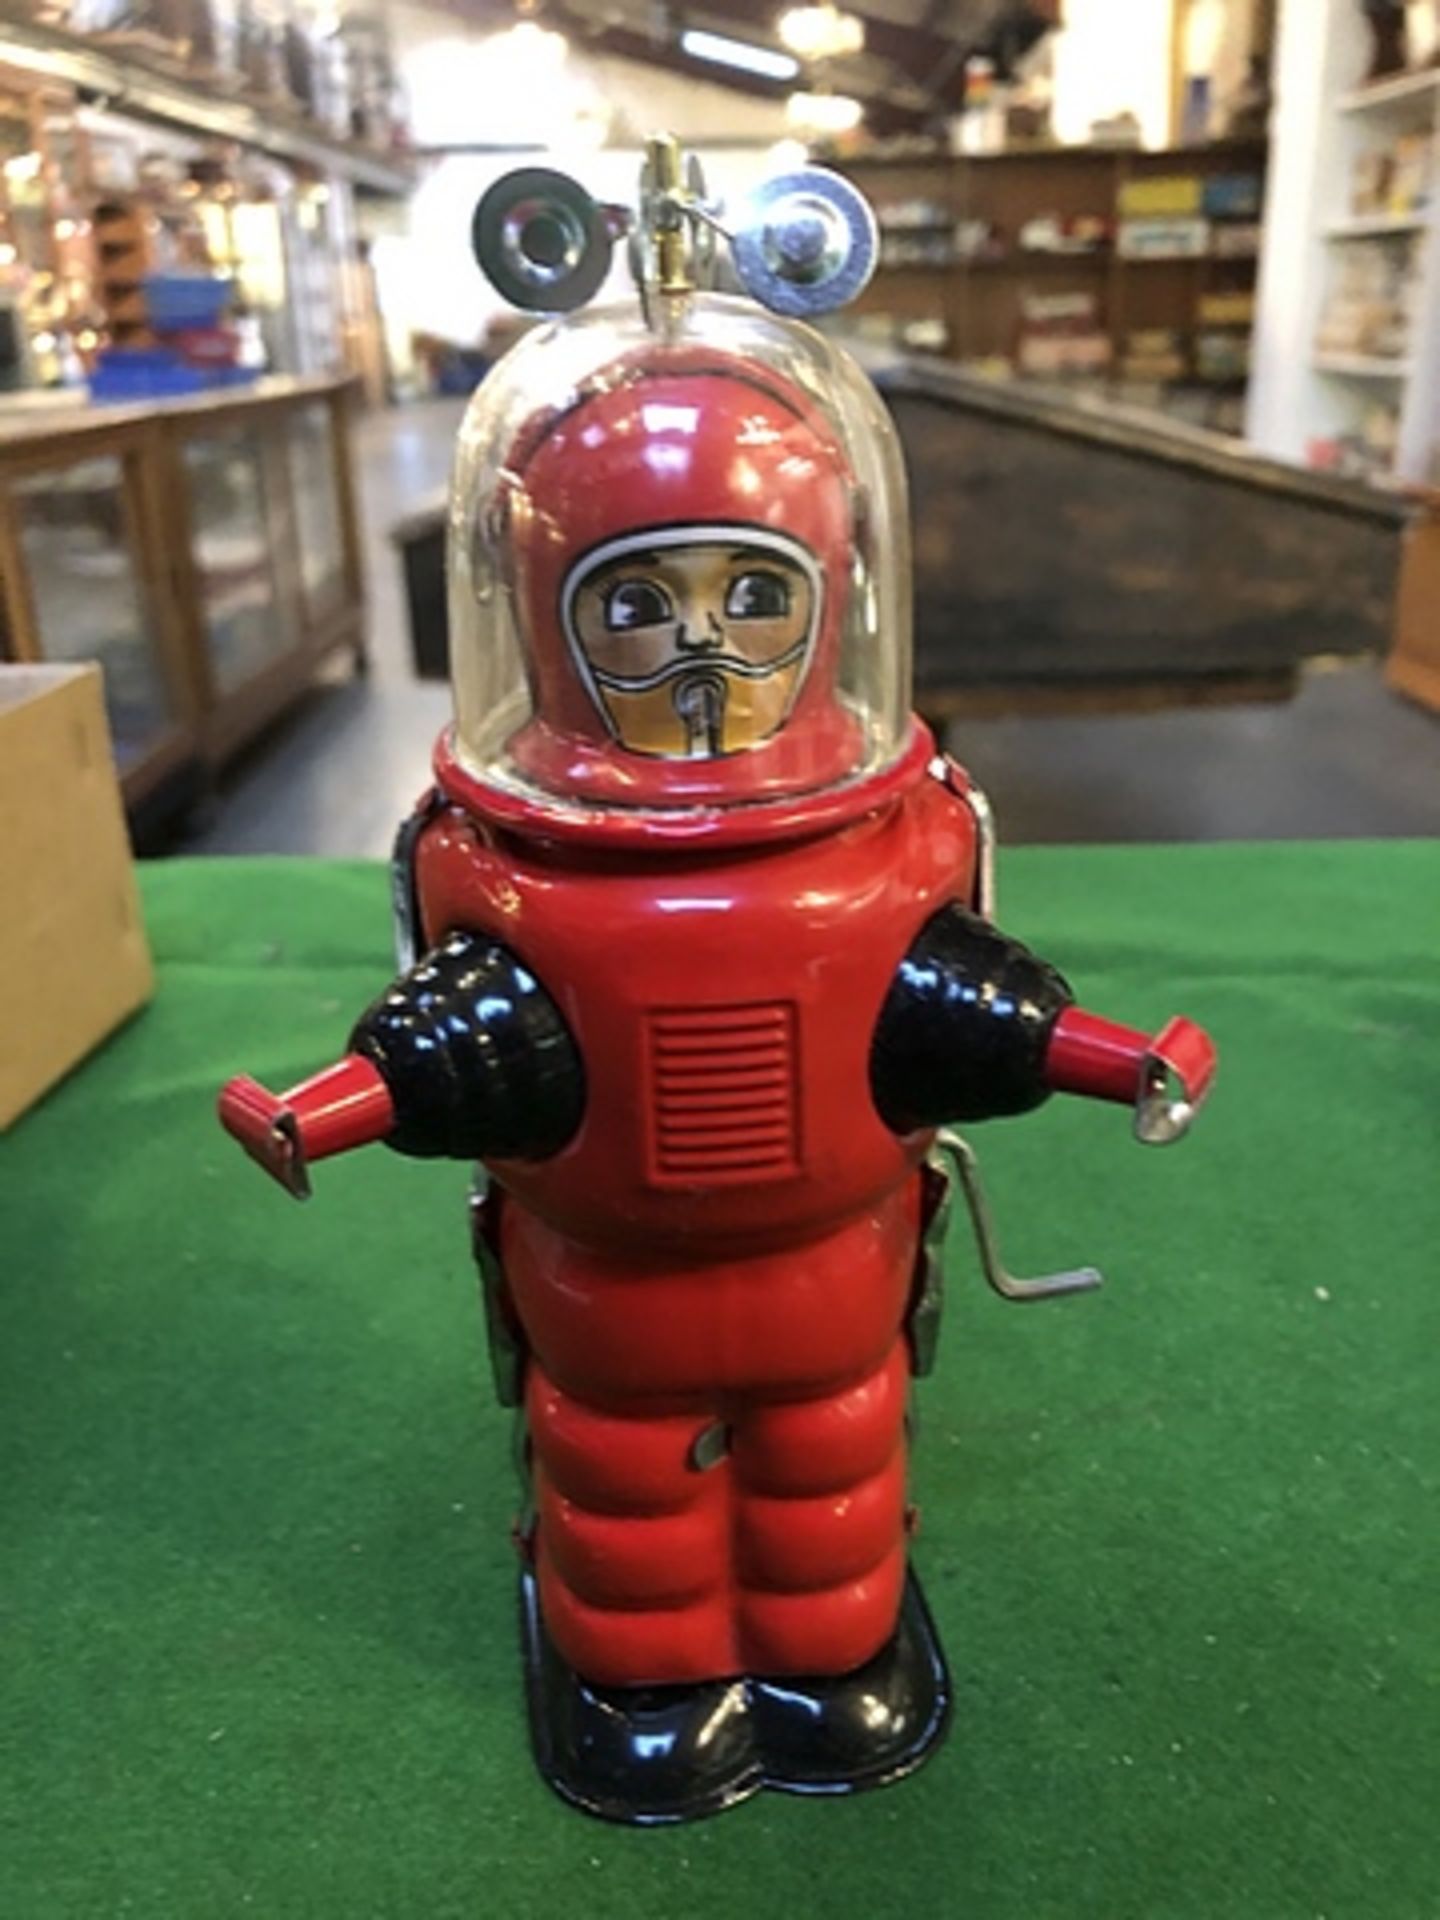 Tin Moon Explorer Robot Red Tin Tom Toy 7.5 Inches Tall Crank-Handle Inertia Drive Which Propels - Image 2 of 2